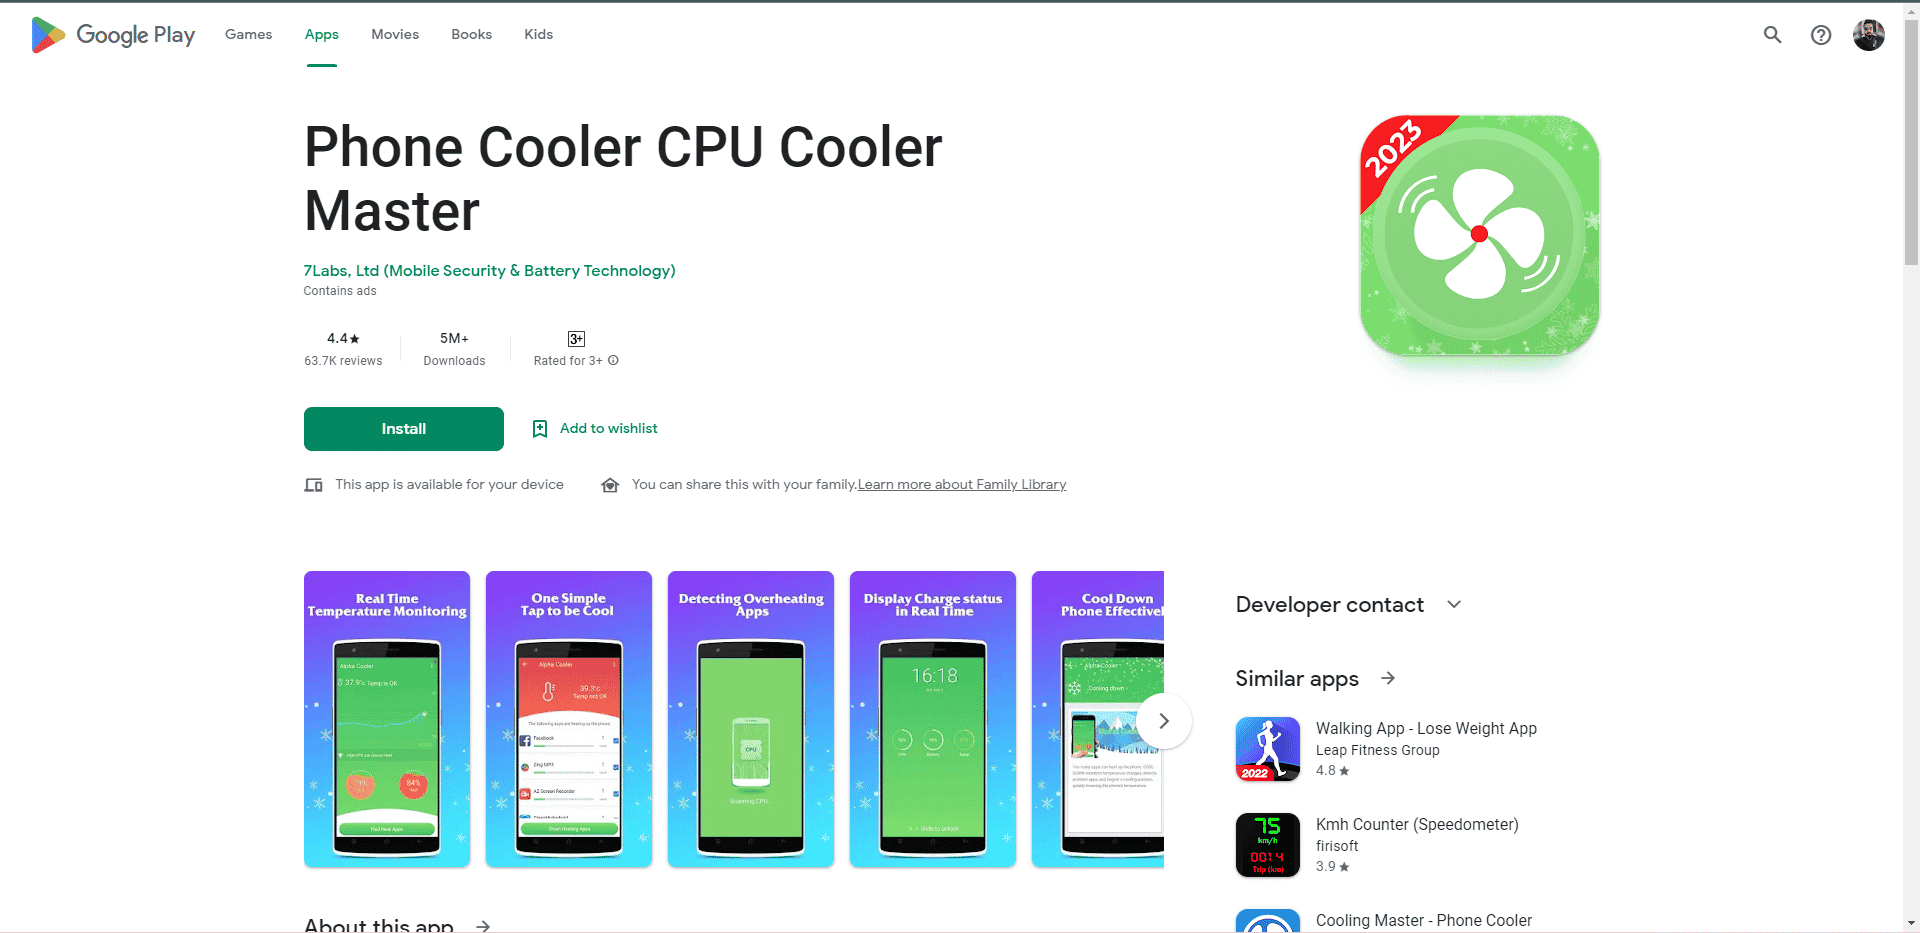 Phone Cooler CPU Cooler Master playstore webpage. Best Phone Cooling Apps for Android and iOS